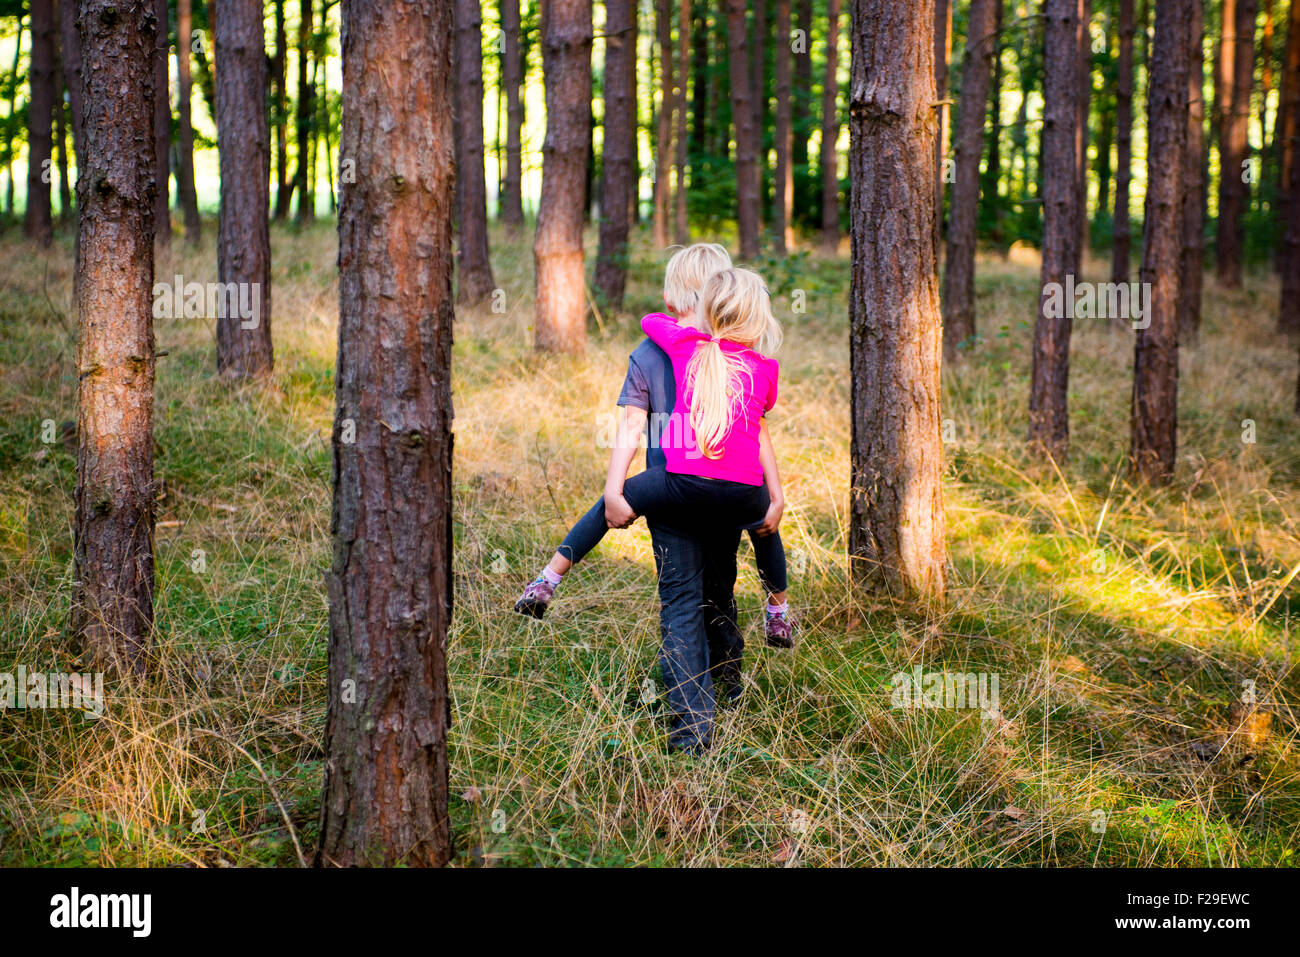 Young boy giving young girl piggyback outdoors smiling, forest, woodland, wood, summer, holiday, siblings, children playing, kid Stock Photo